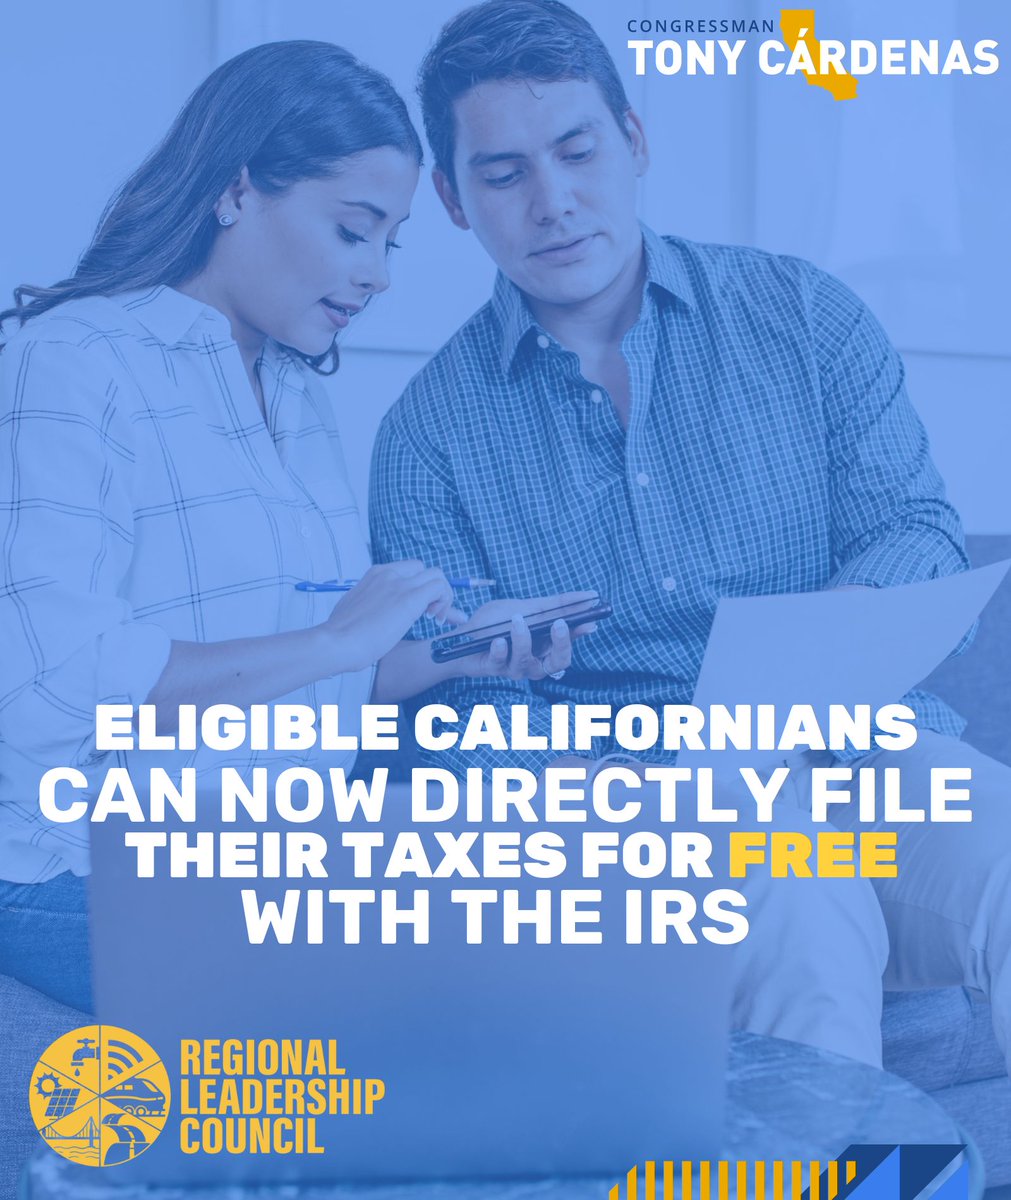 💸 Say goodbye to filing fees! With the IRS Direct File pilot, eligible participants can file their federal taxes for FREE. It's the perfect solution for individuals with simple tax needs. Don't miss out on this opportunity! #FreeTaxFiling #IRS #DirectFile